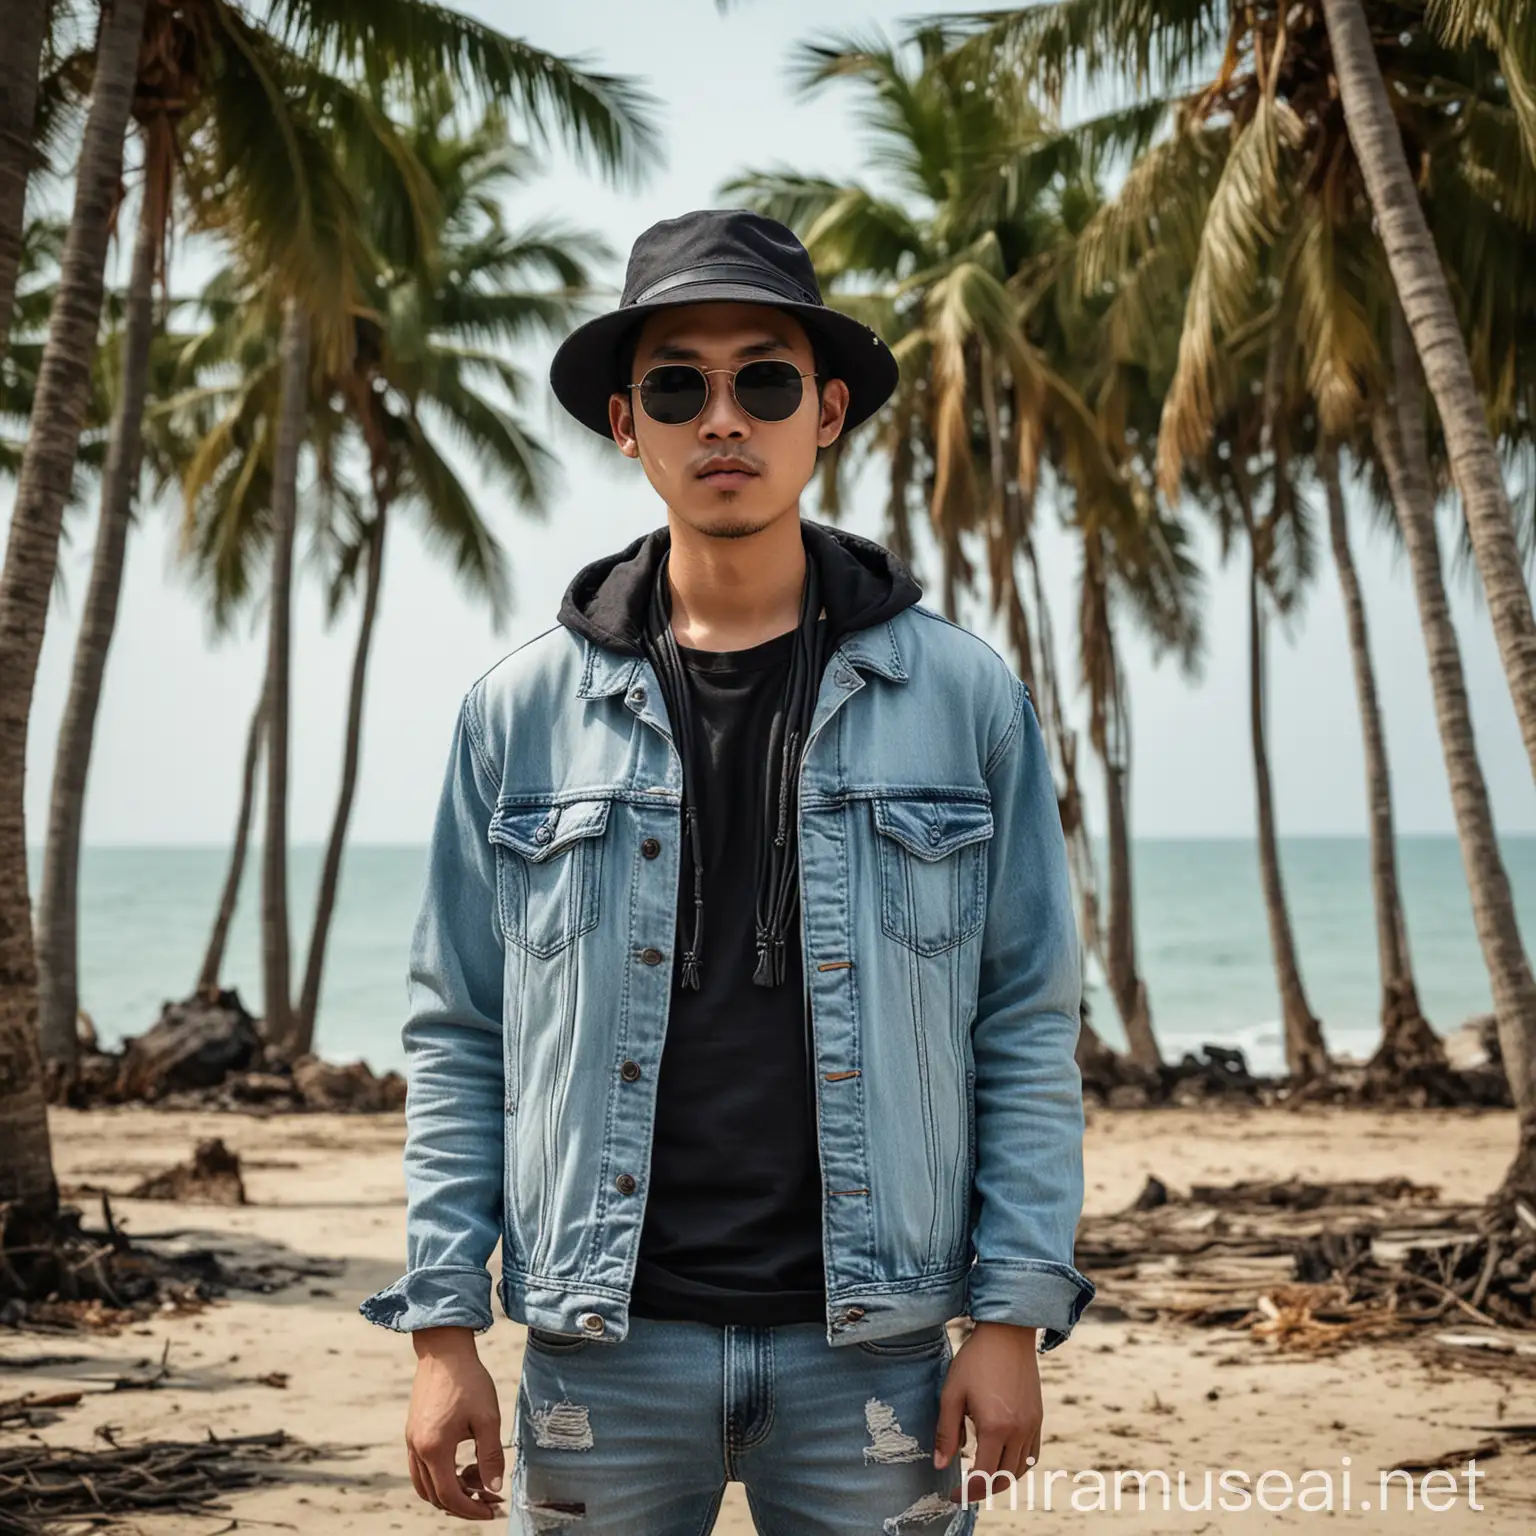 Nikon camera result: an Asian man wearing a black bucket hat, black loci sunglasses, light blue ripped jeans jacket and jeans standing by the beach with coconut trees in the daytime, very detailed, very clear, high resolution.